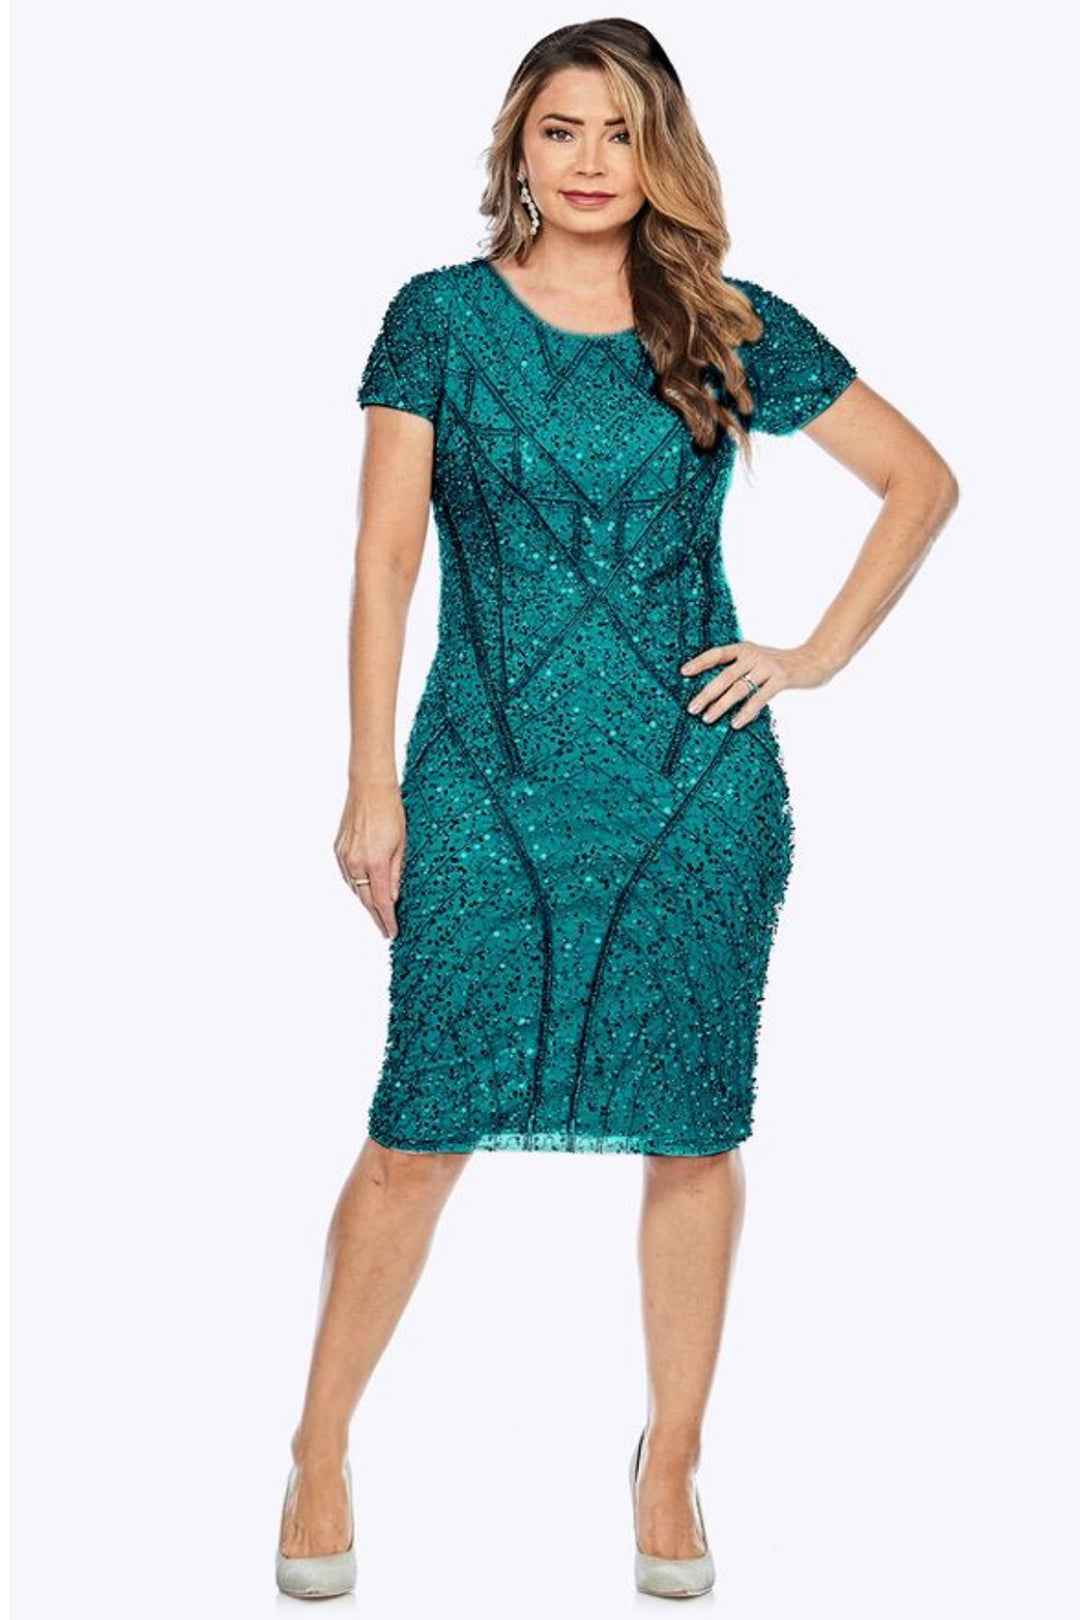 Woman wearing the Jade Belle dress in Jade by Jesse Harper, sold and shipped from Pizazz Boutique Nelson Bay women's dresses online Australia